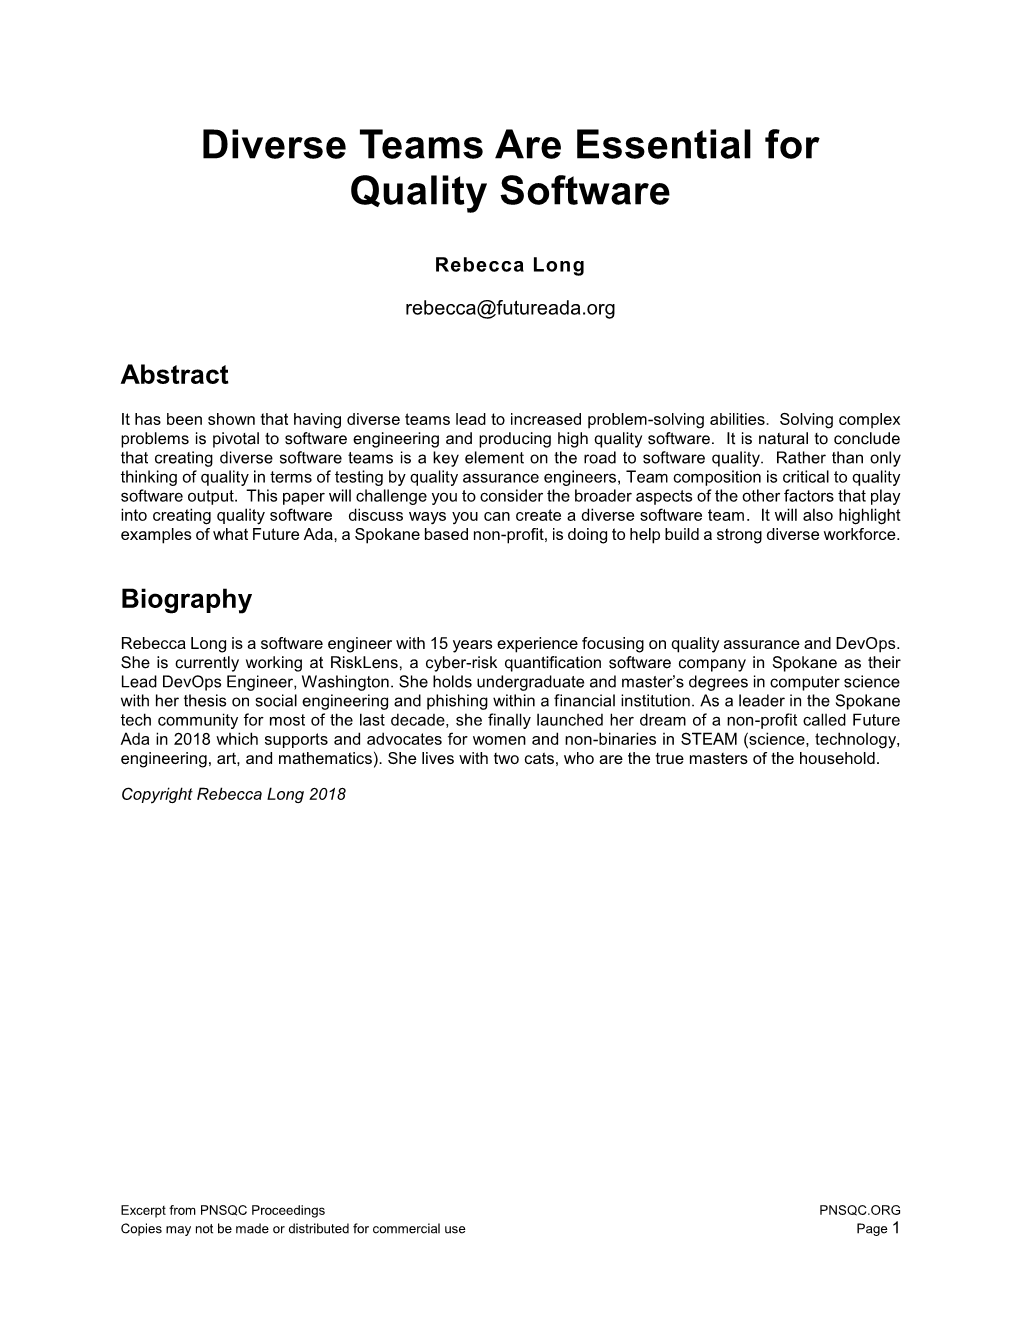 Diverse Teams Are Essential for Quality Software